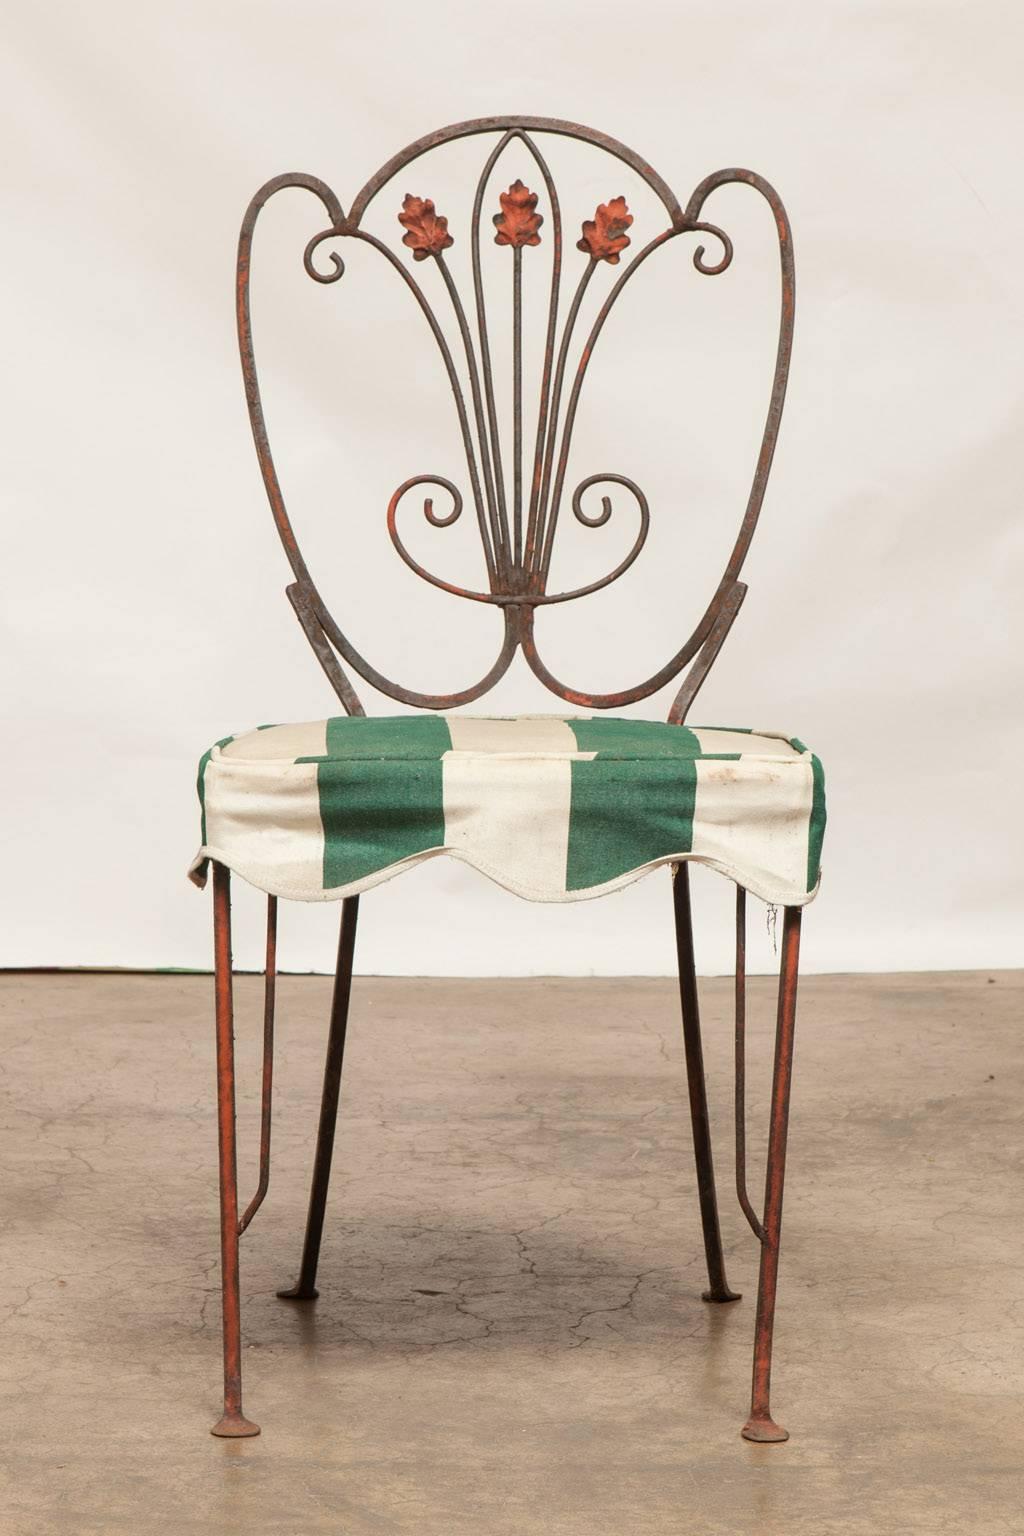 Charming set of French bistro dining chairs featuring a heart shaped back with a floral scrolled back. Wooden chair pads with vintage covers in a green and white cabana stripe. The finish on the chairs is well patinated and three chairs are missing